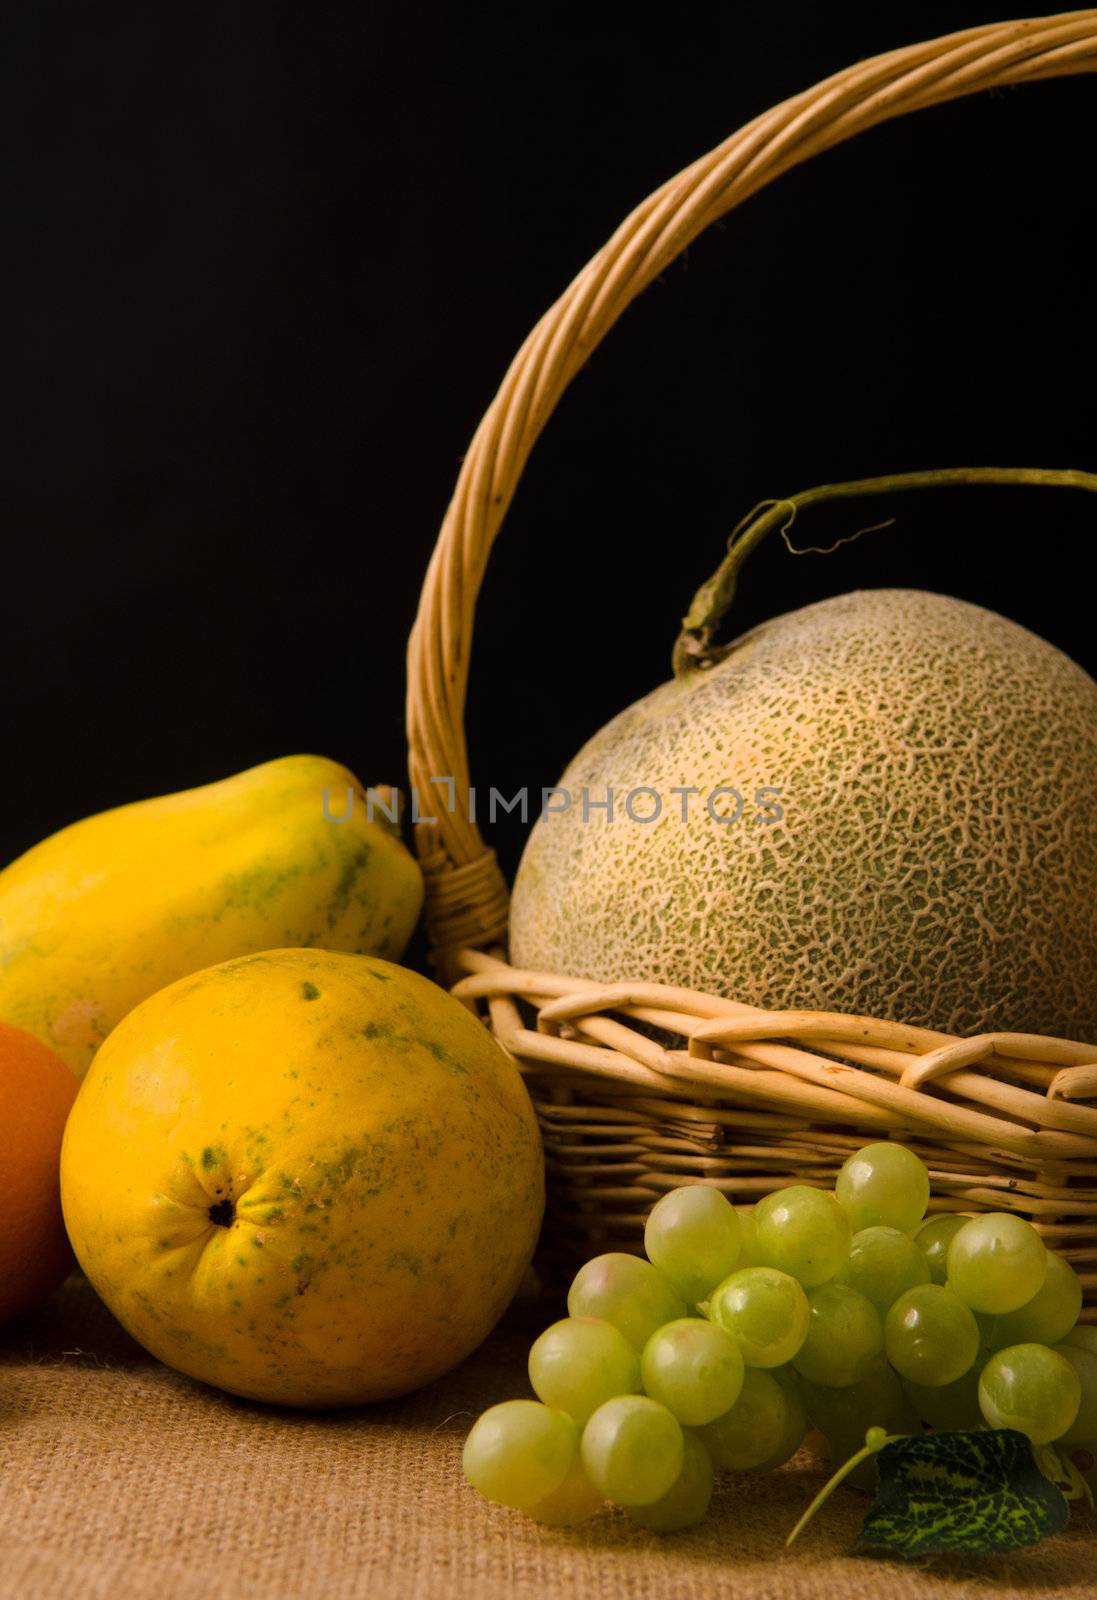 group fruits in dark background by yuliang11